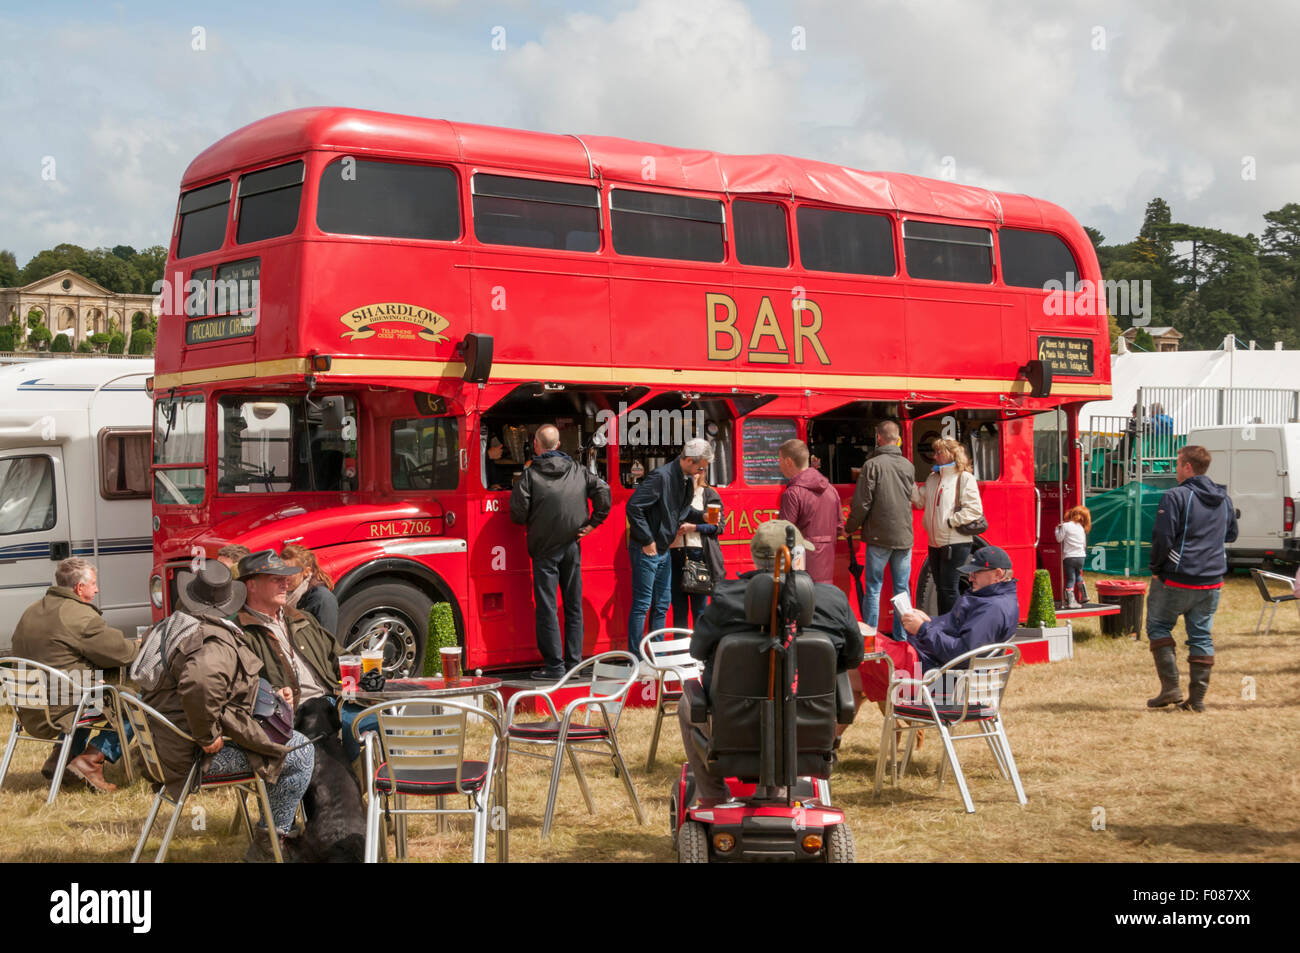 A red London double-decker Routemaster bus converted for use as a bar, at the Holkham Country Fair. Stock Photo